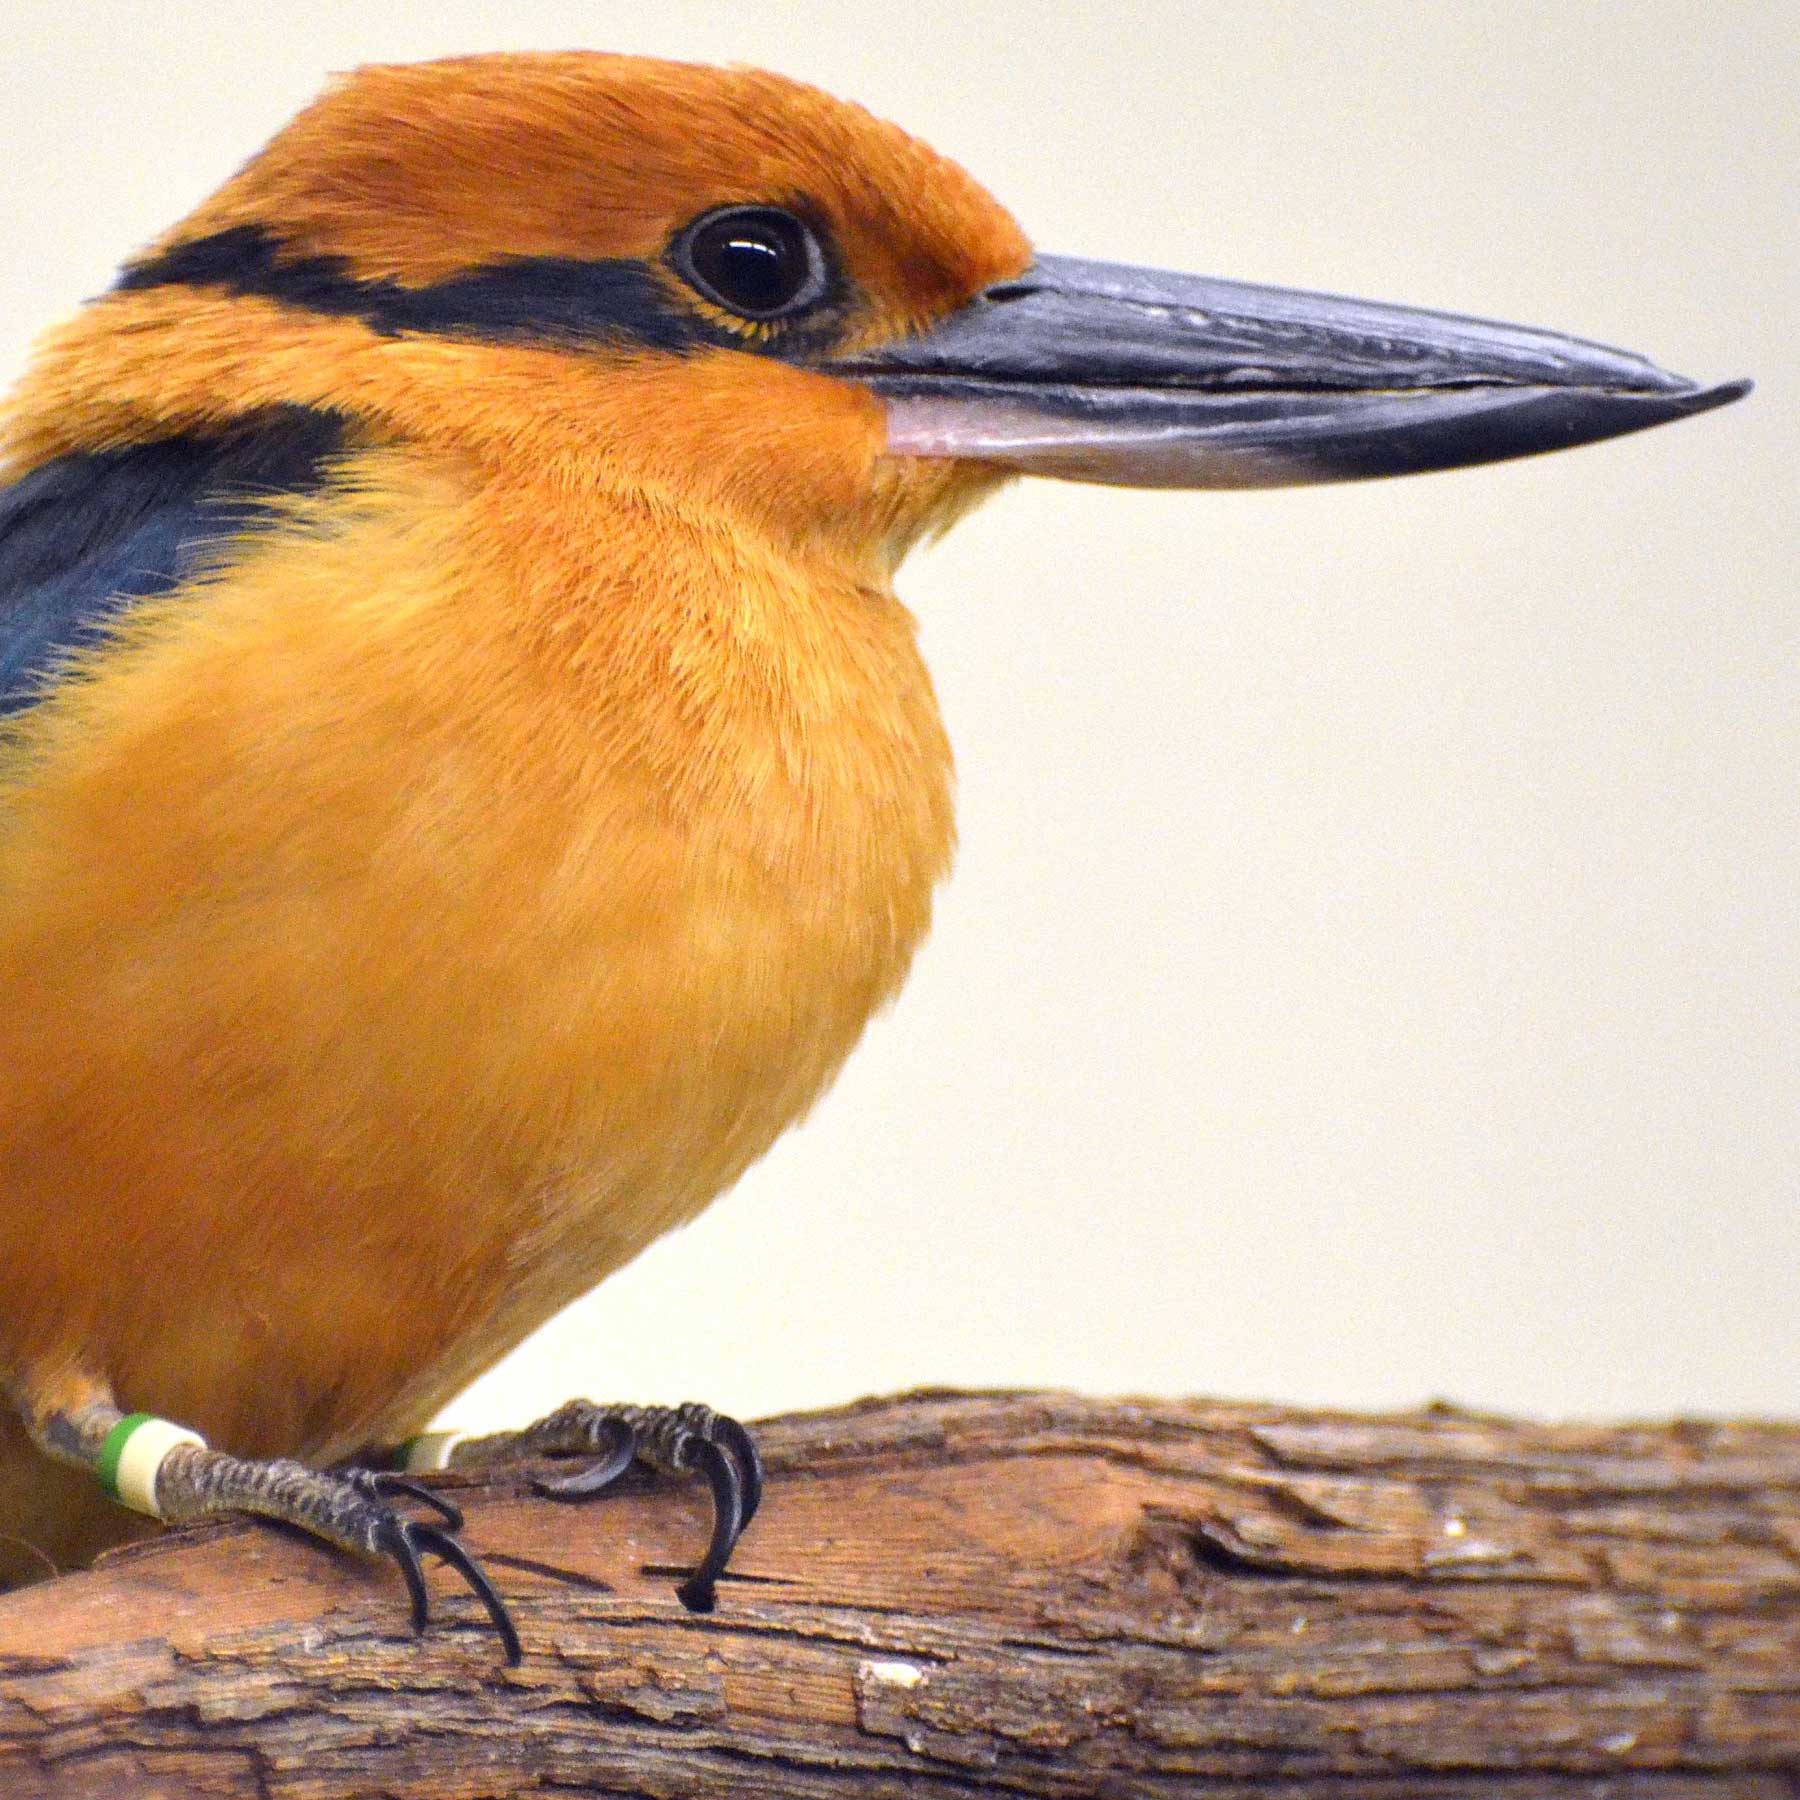 A Guam kingfisher perched on a branch. The kingfisher is a bird with a large head and beak. Its head and chest are mostly orange, whereas its back is dark blue.